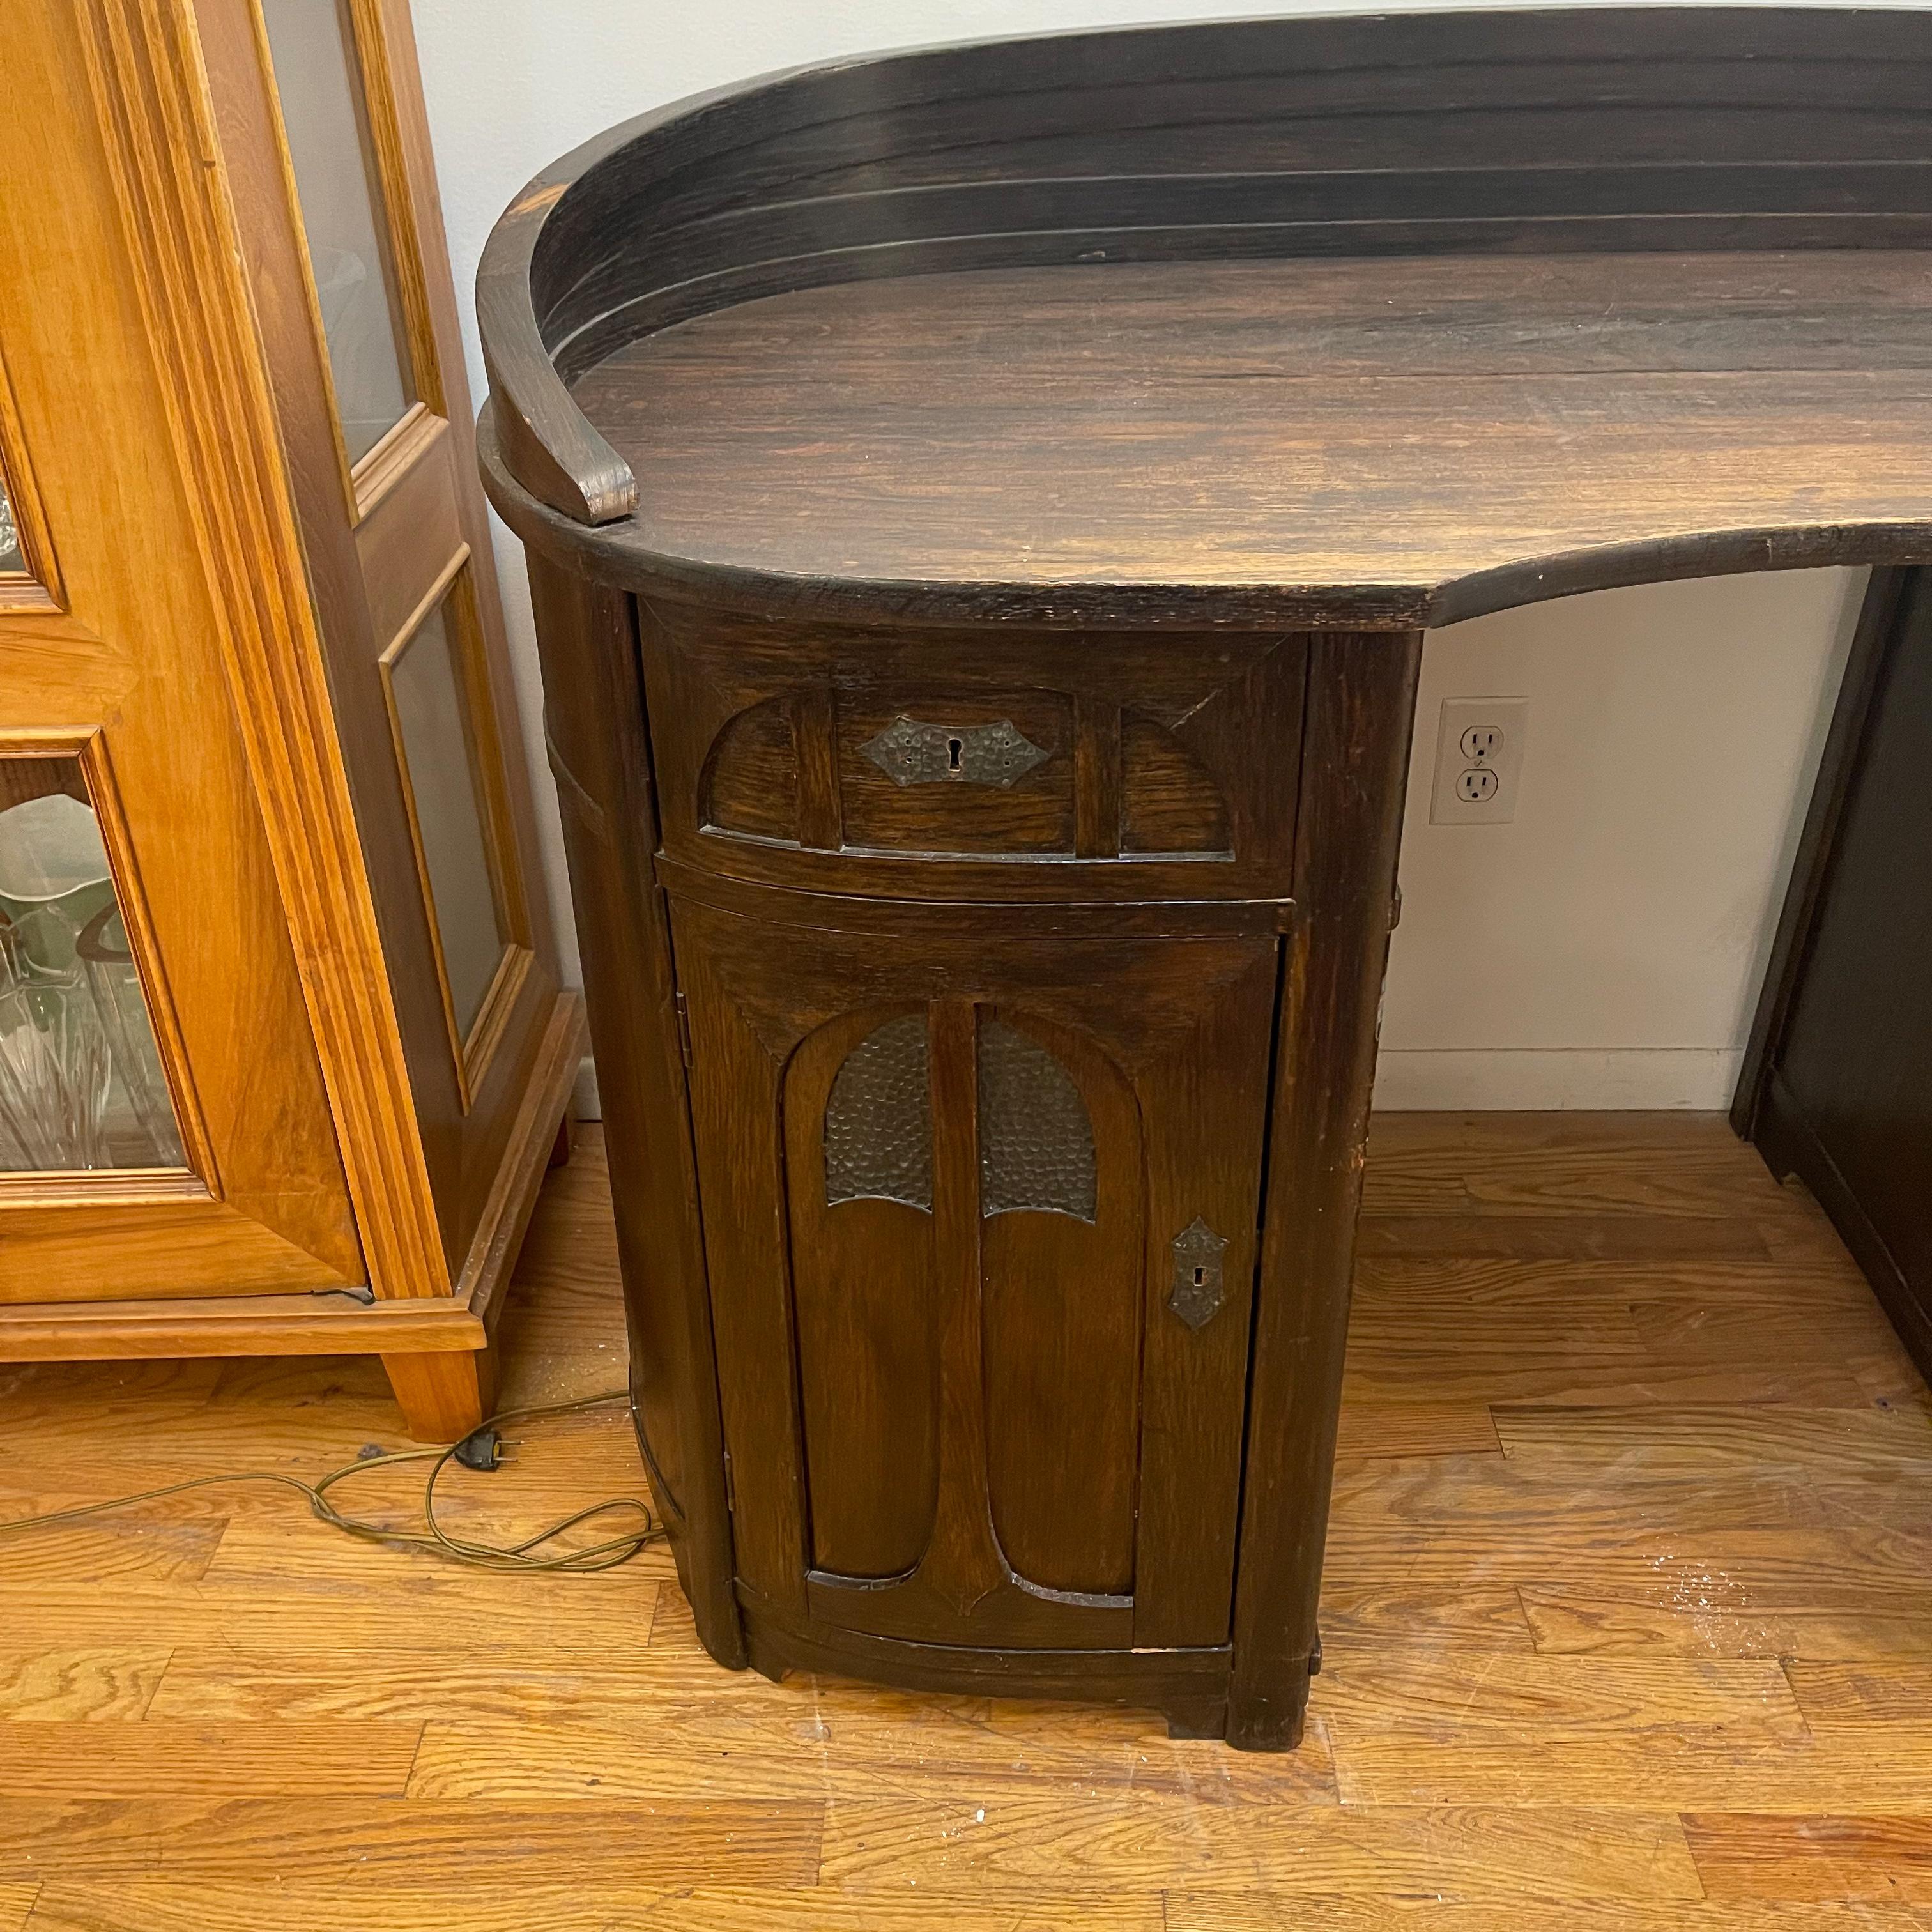 A stunning Jugendstil desk in original condition with all working locks and hardware. Ebonized oak provides an amazingly sturdy writing surface which is at 29.75